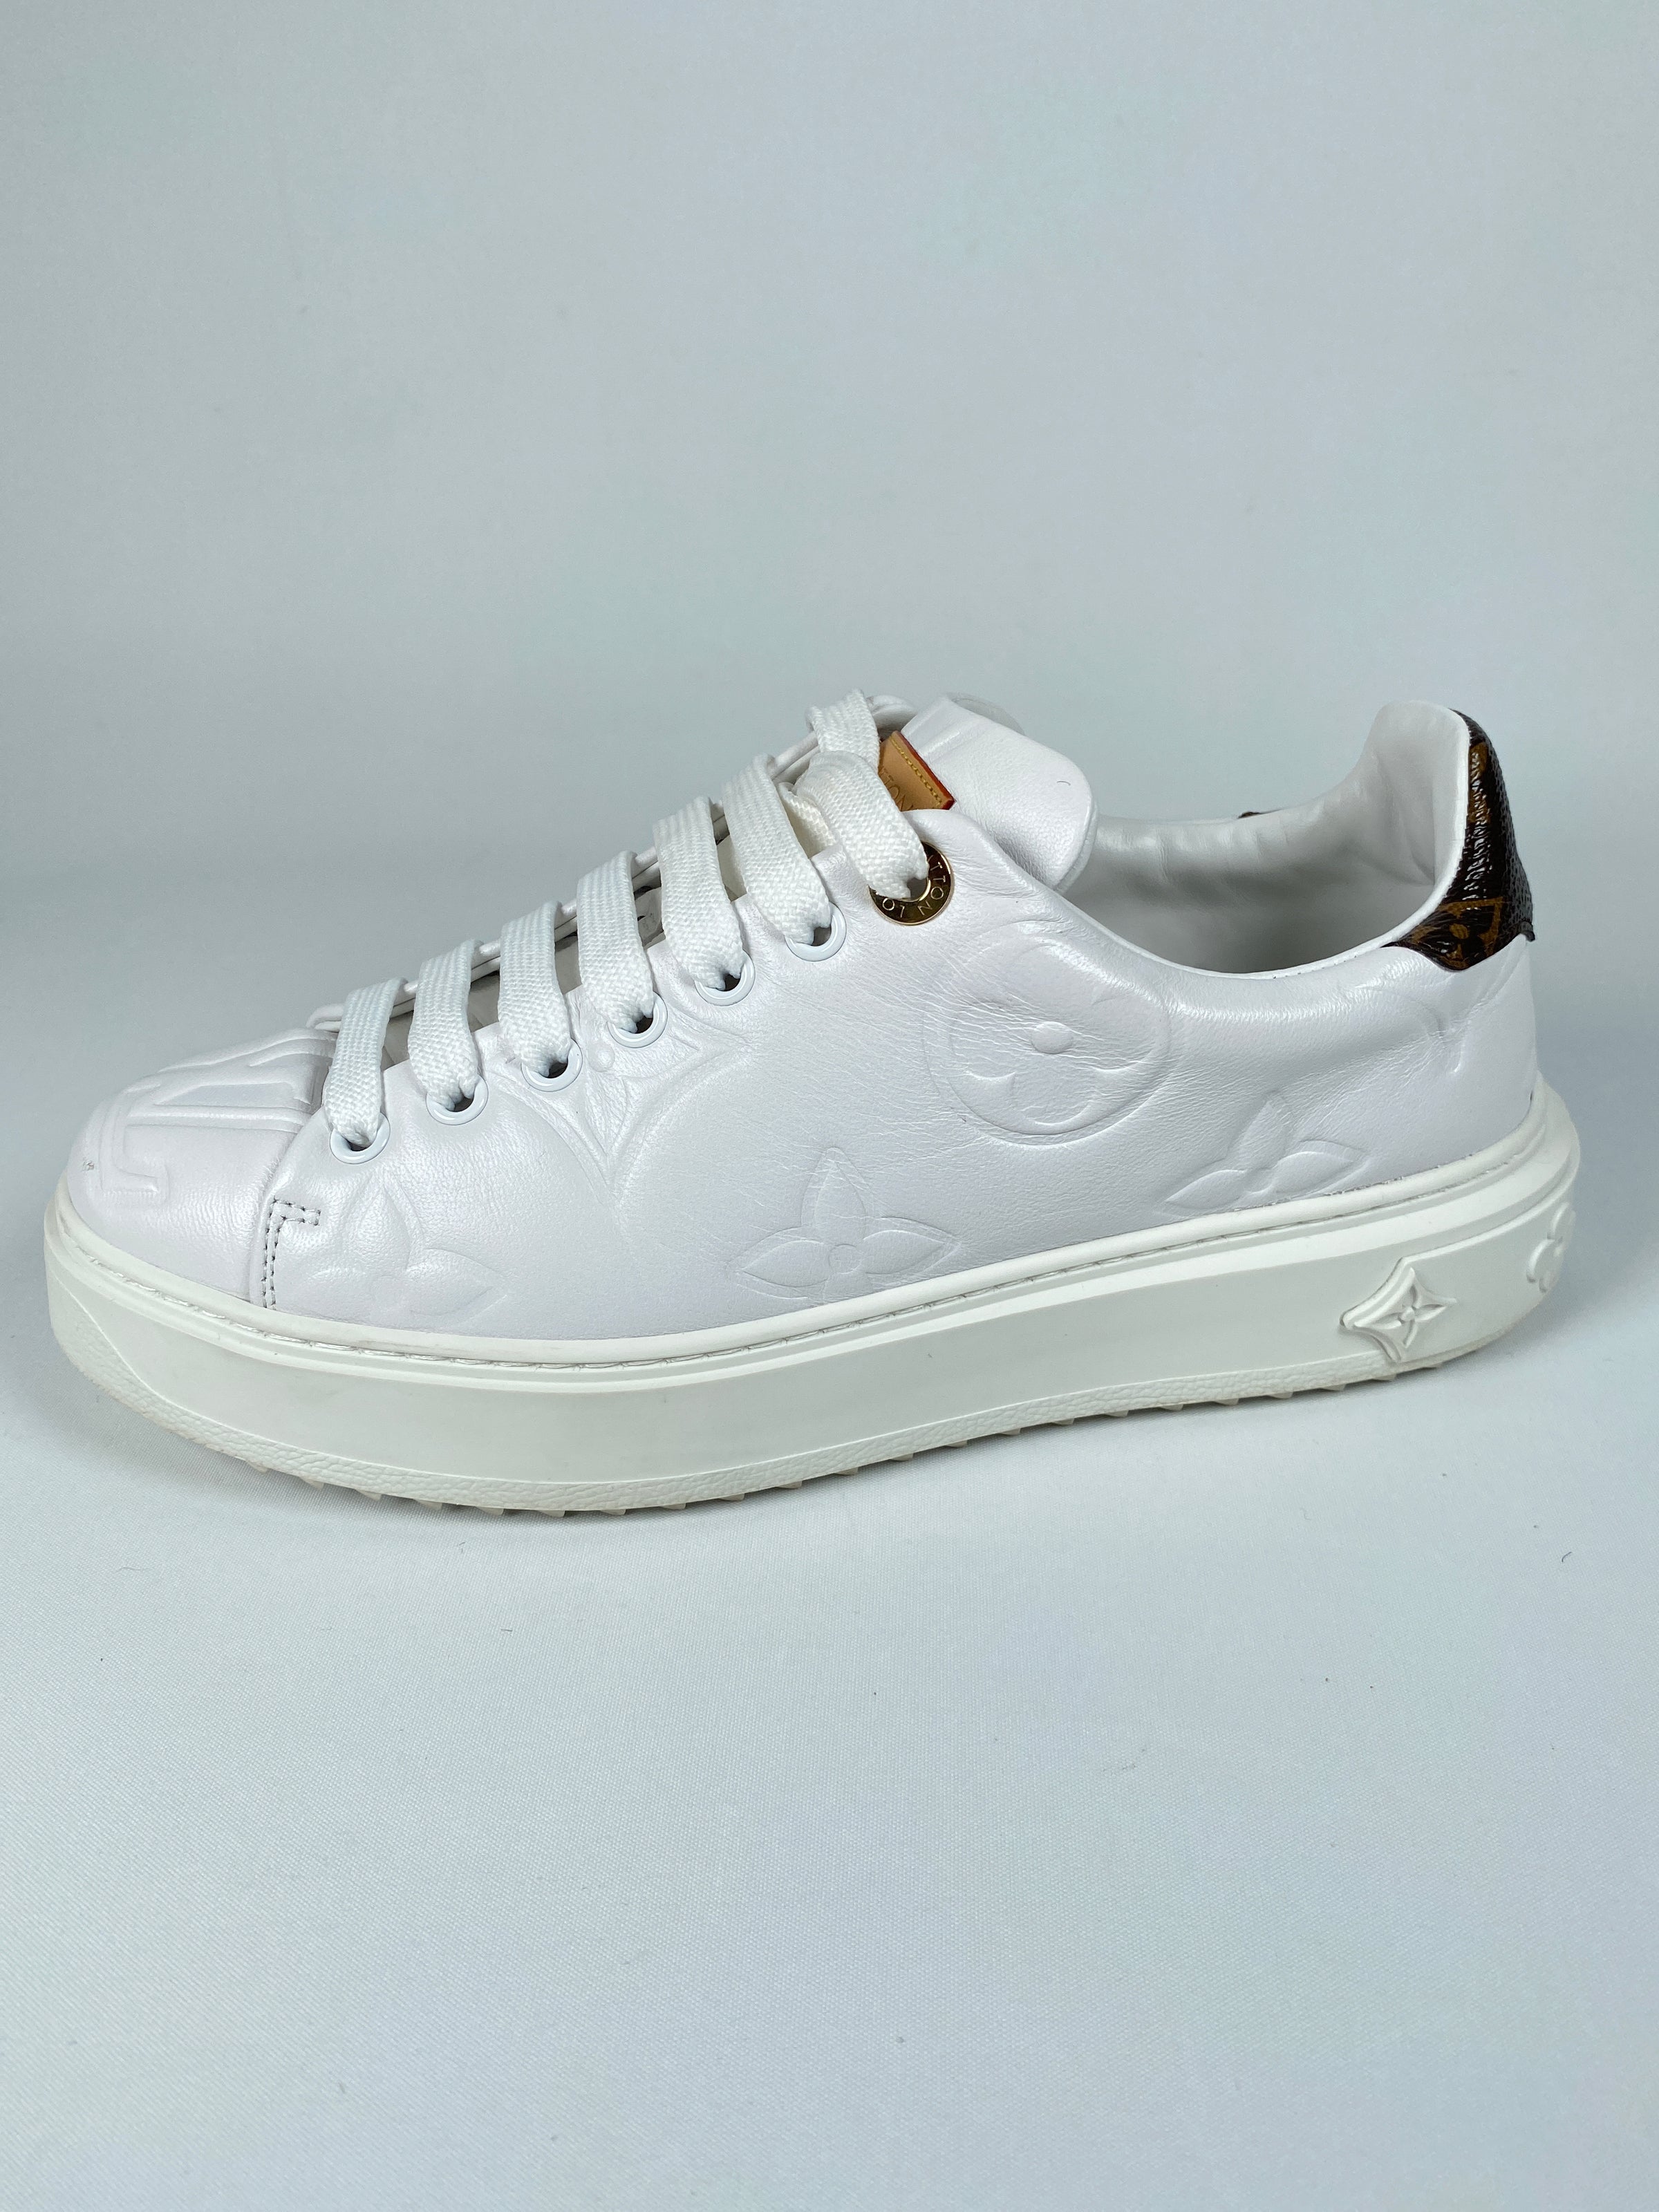 Louis Vuitton White Leather Time Out Low Top Sneakers Size 40 Louis Vuitton